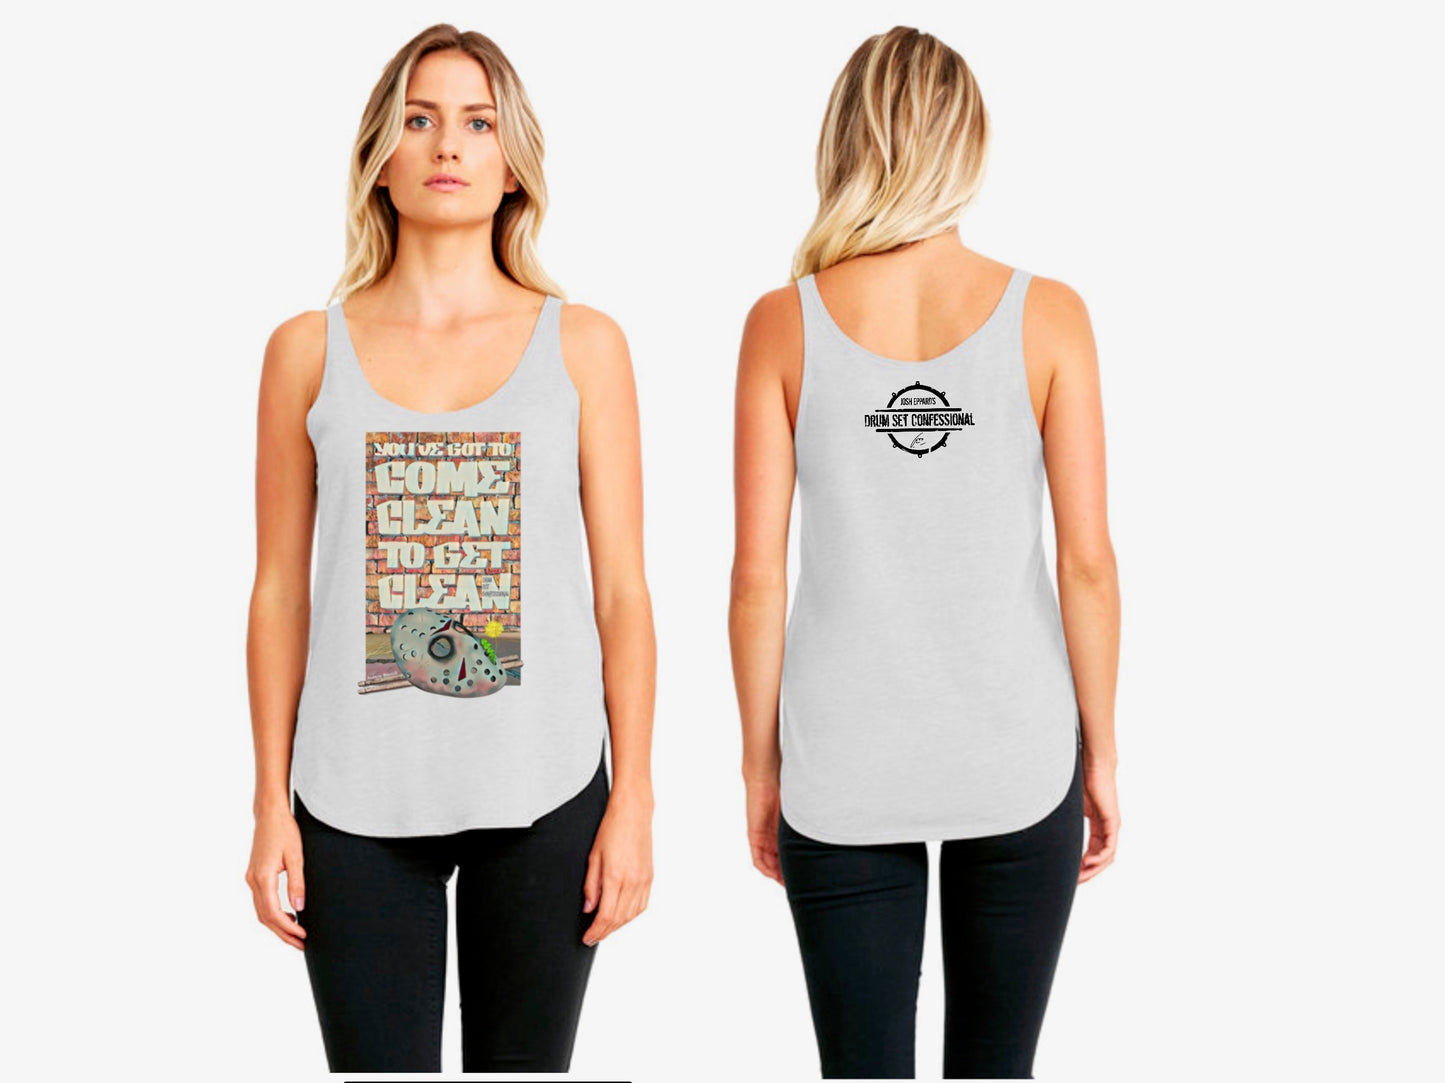 DSC "Mask" Gray Next Level Apparel Ladies' Festival Tank (100% of profits fuel outreach and donations to addiction/recovery causes.)